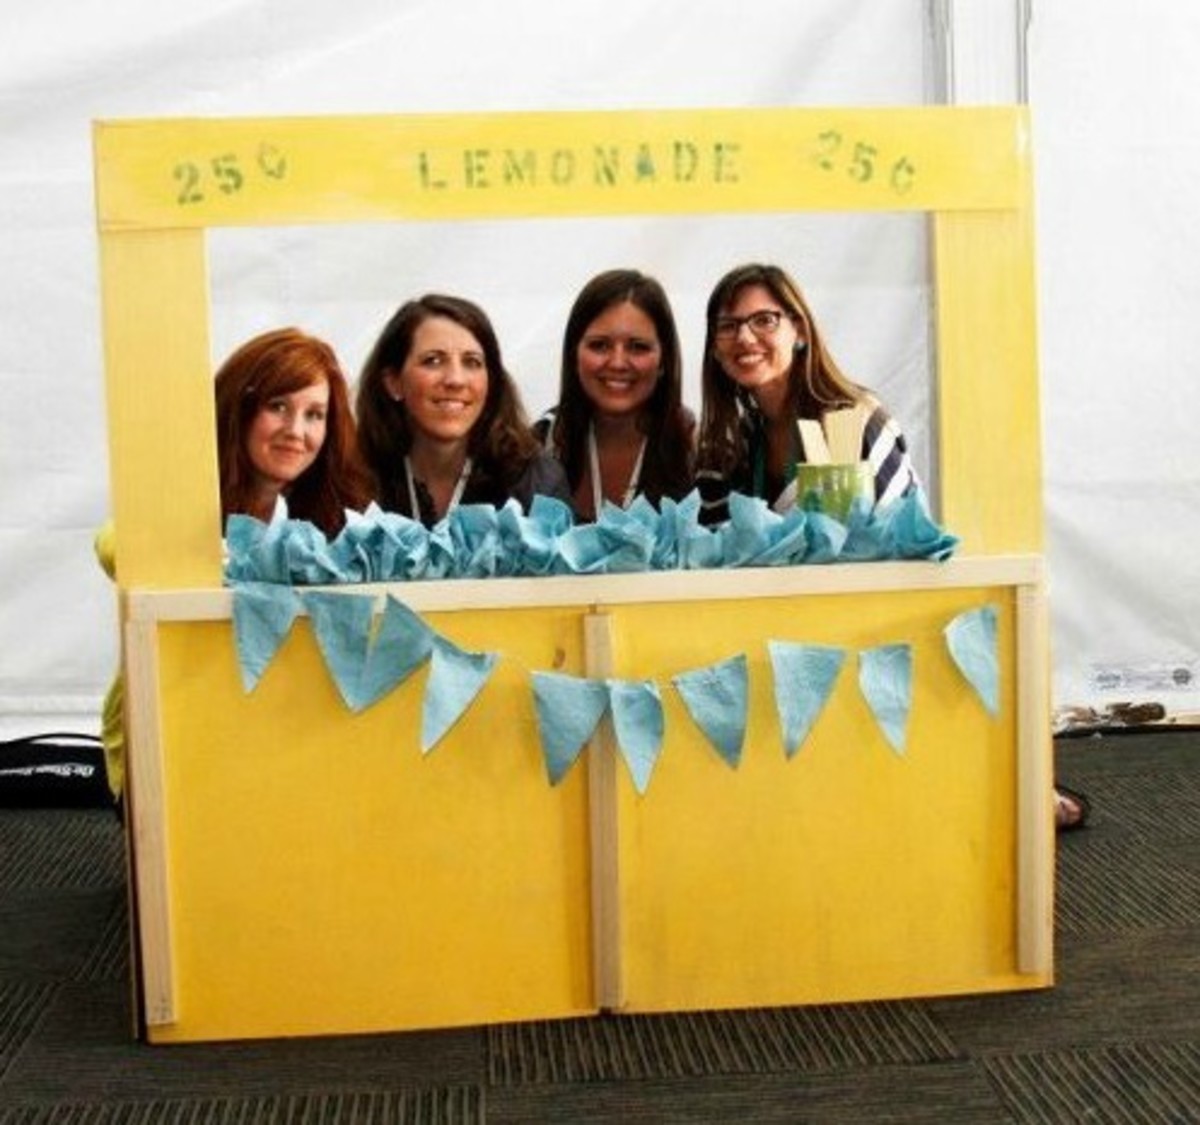 Food-inspired Building Project - The Lemonade Stand